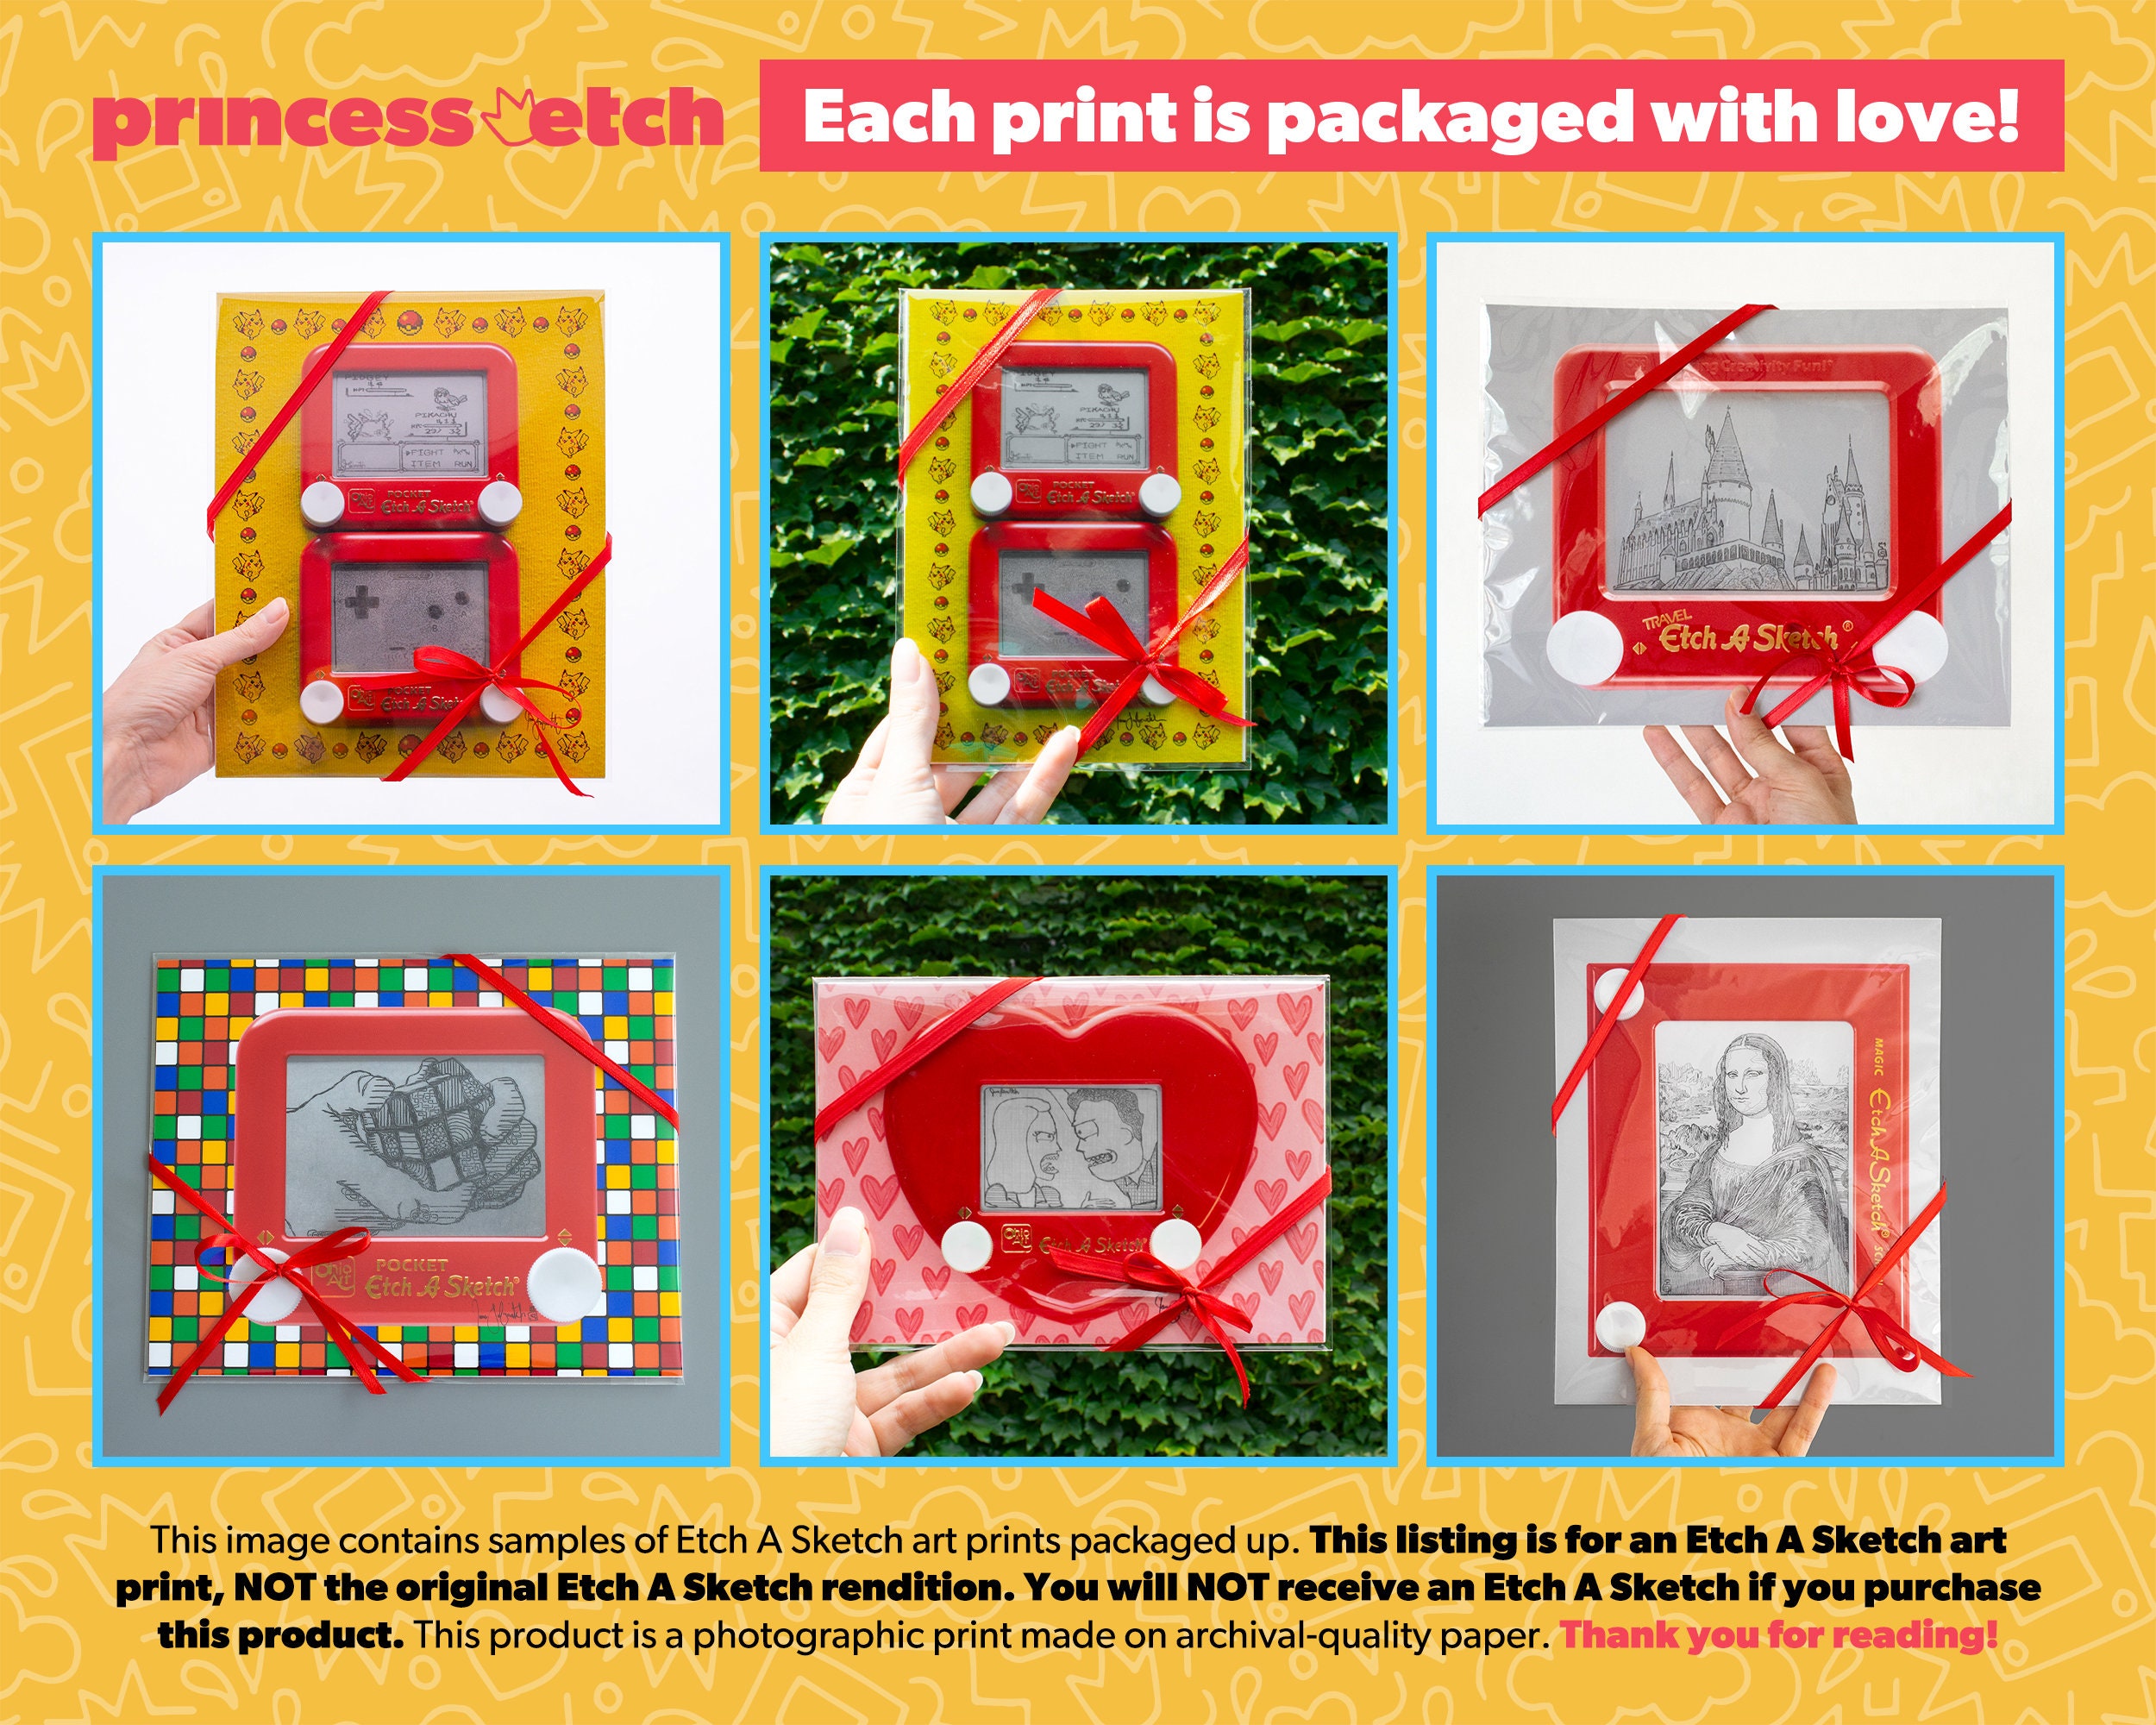 How Does an Etch A Sketch Work?